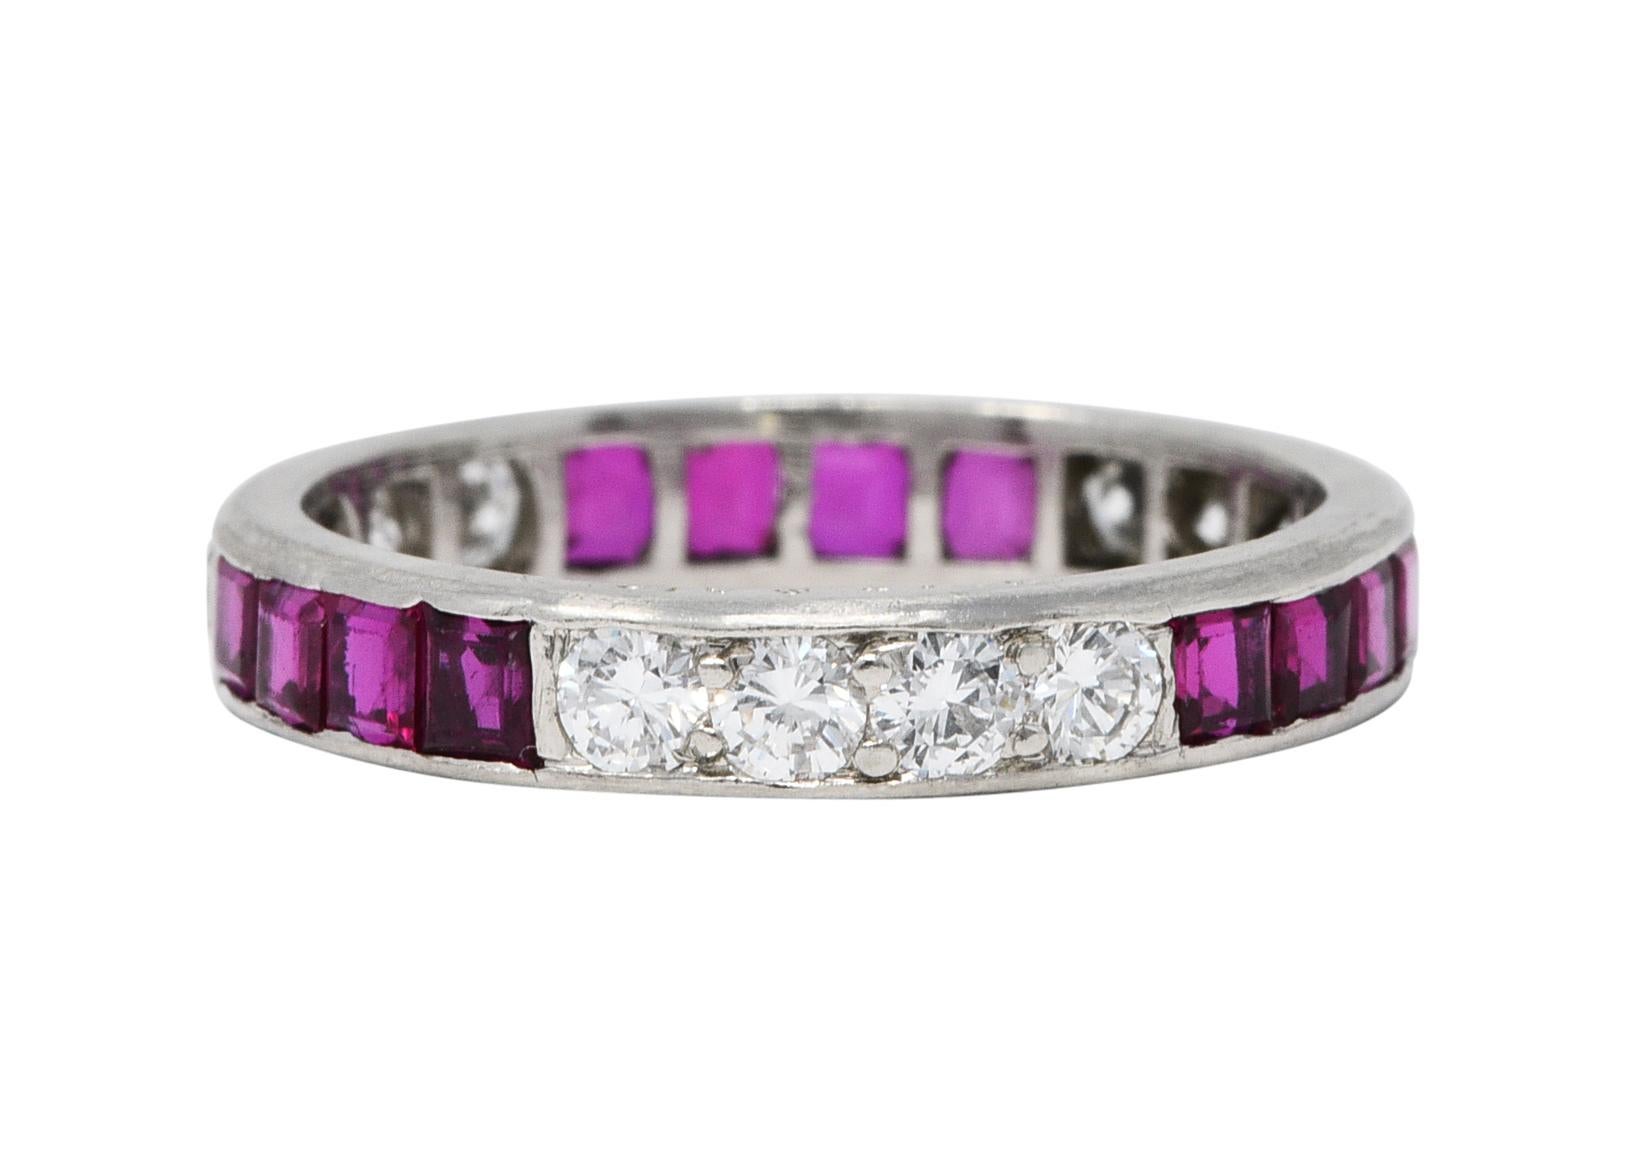 Eternity band ring features round brilliant diamonds alternating with square cut rubies

Diamonds are bead set while weighing in total approximately 0.72 carat - G to I color with SI clarity

Rubies are channel set while weighing in total